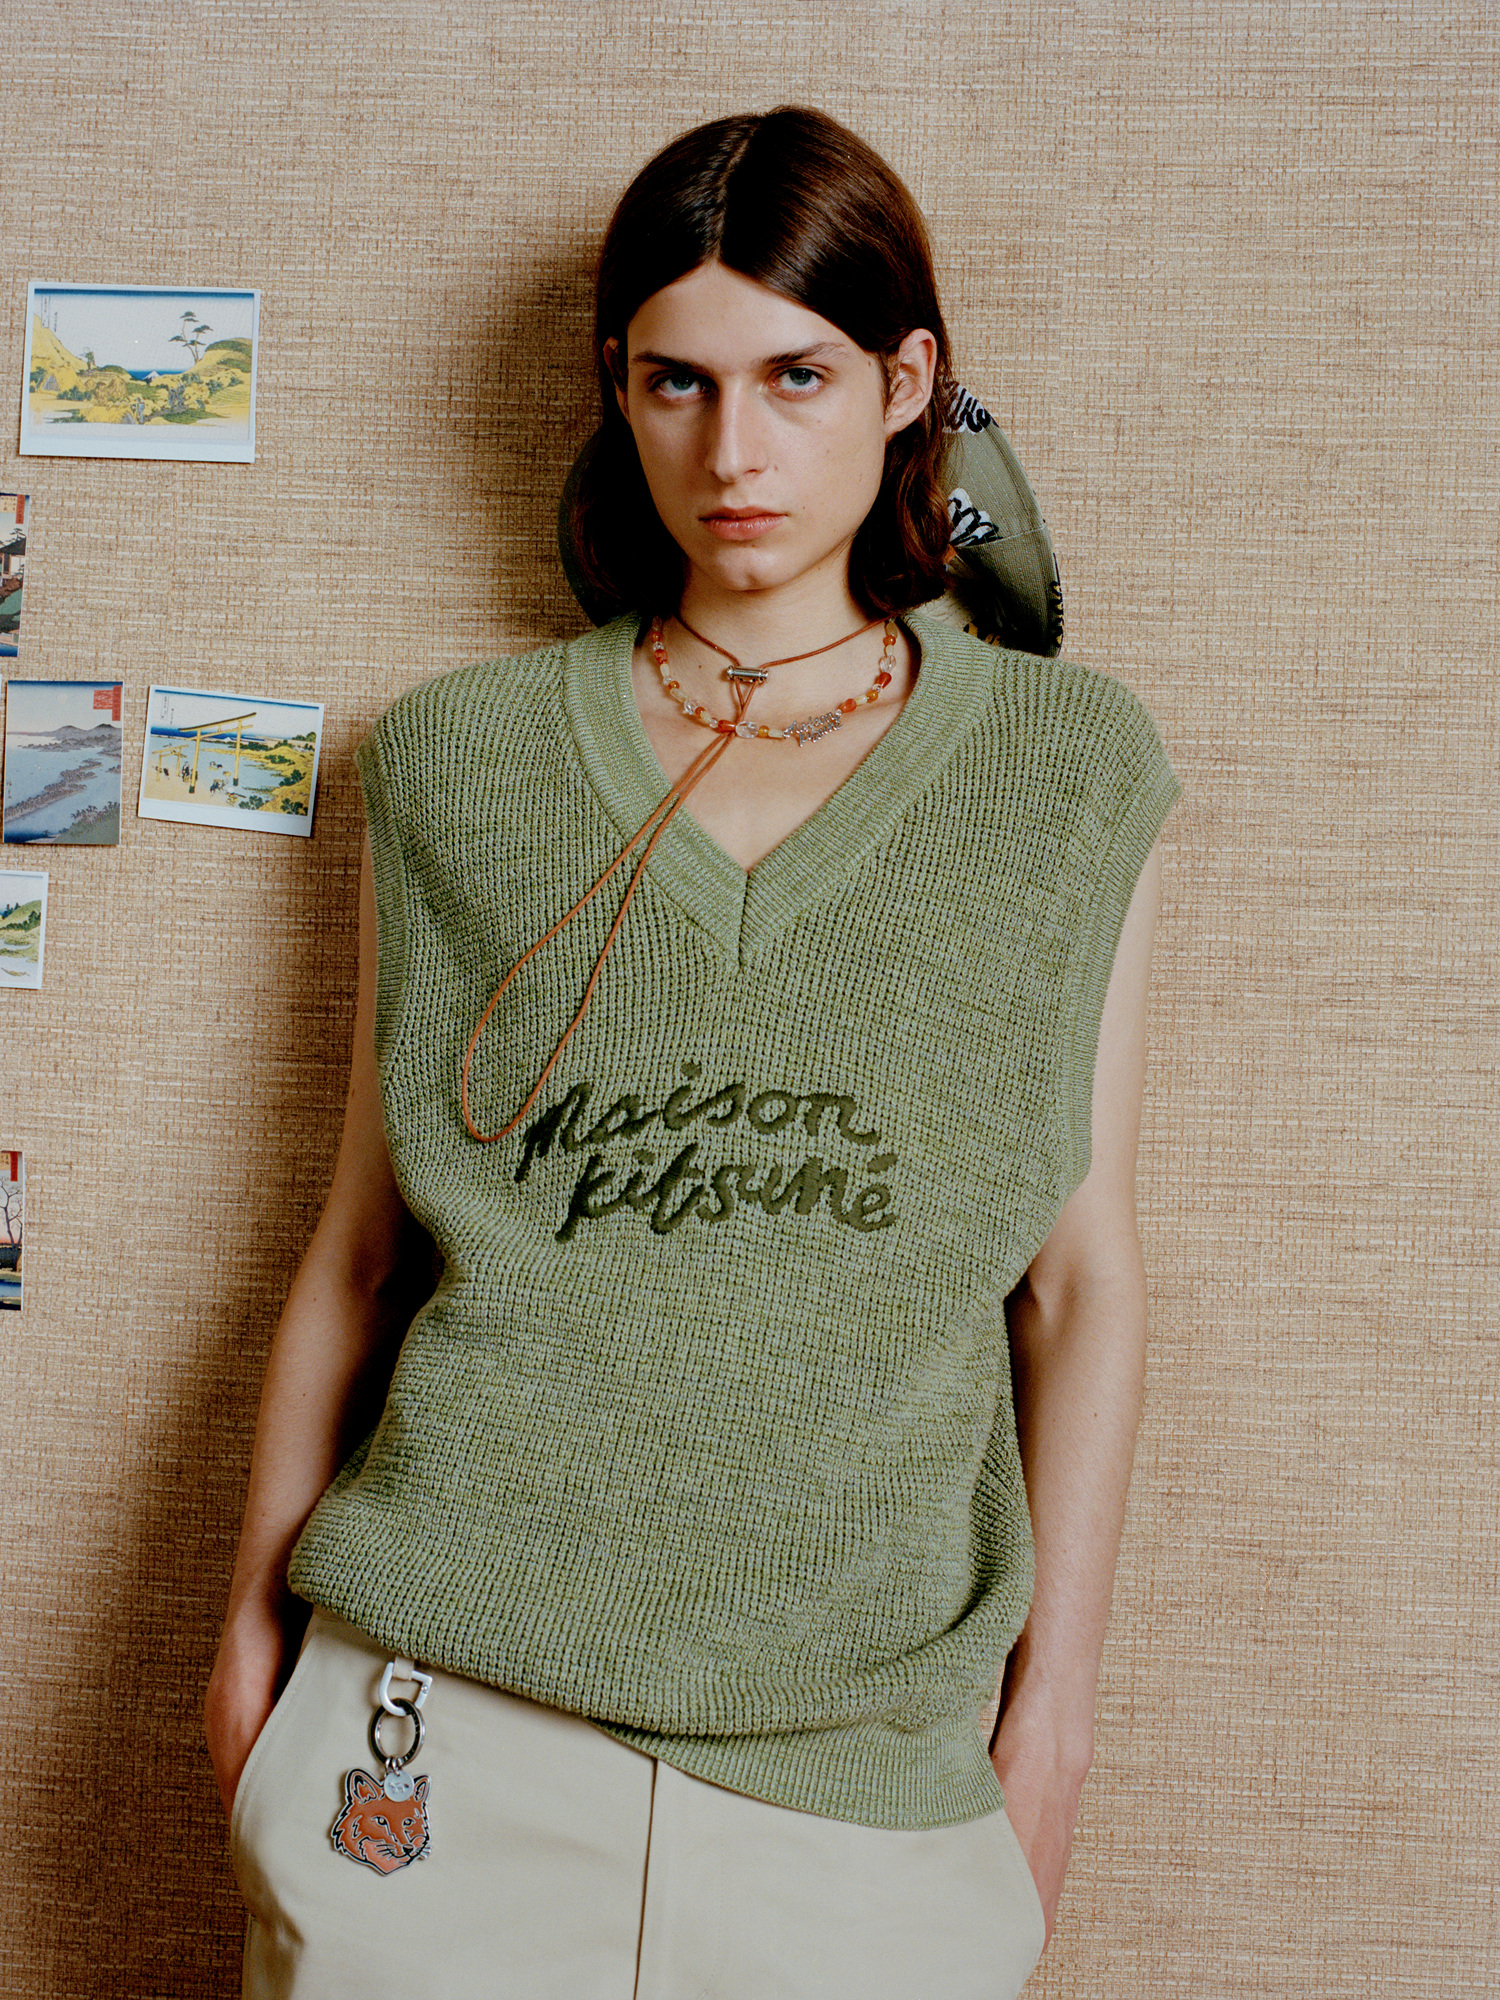 Go green with envy for this Maison Kitsuné sleeveless top in drab green.